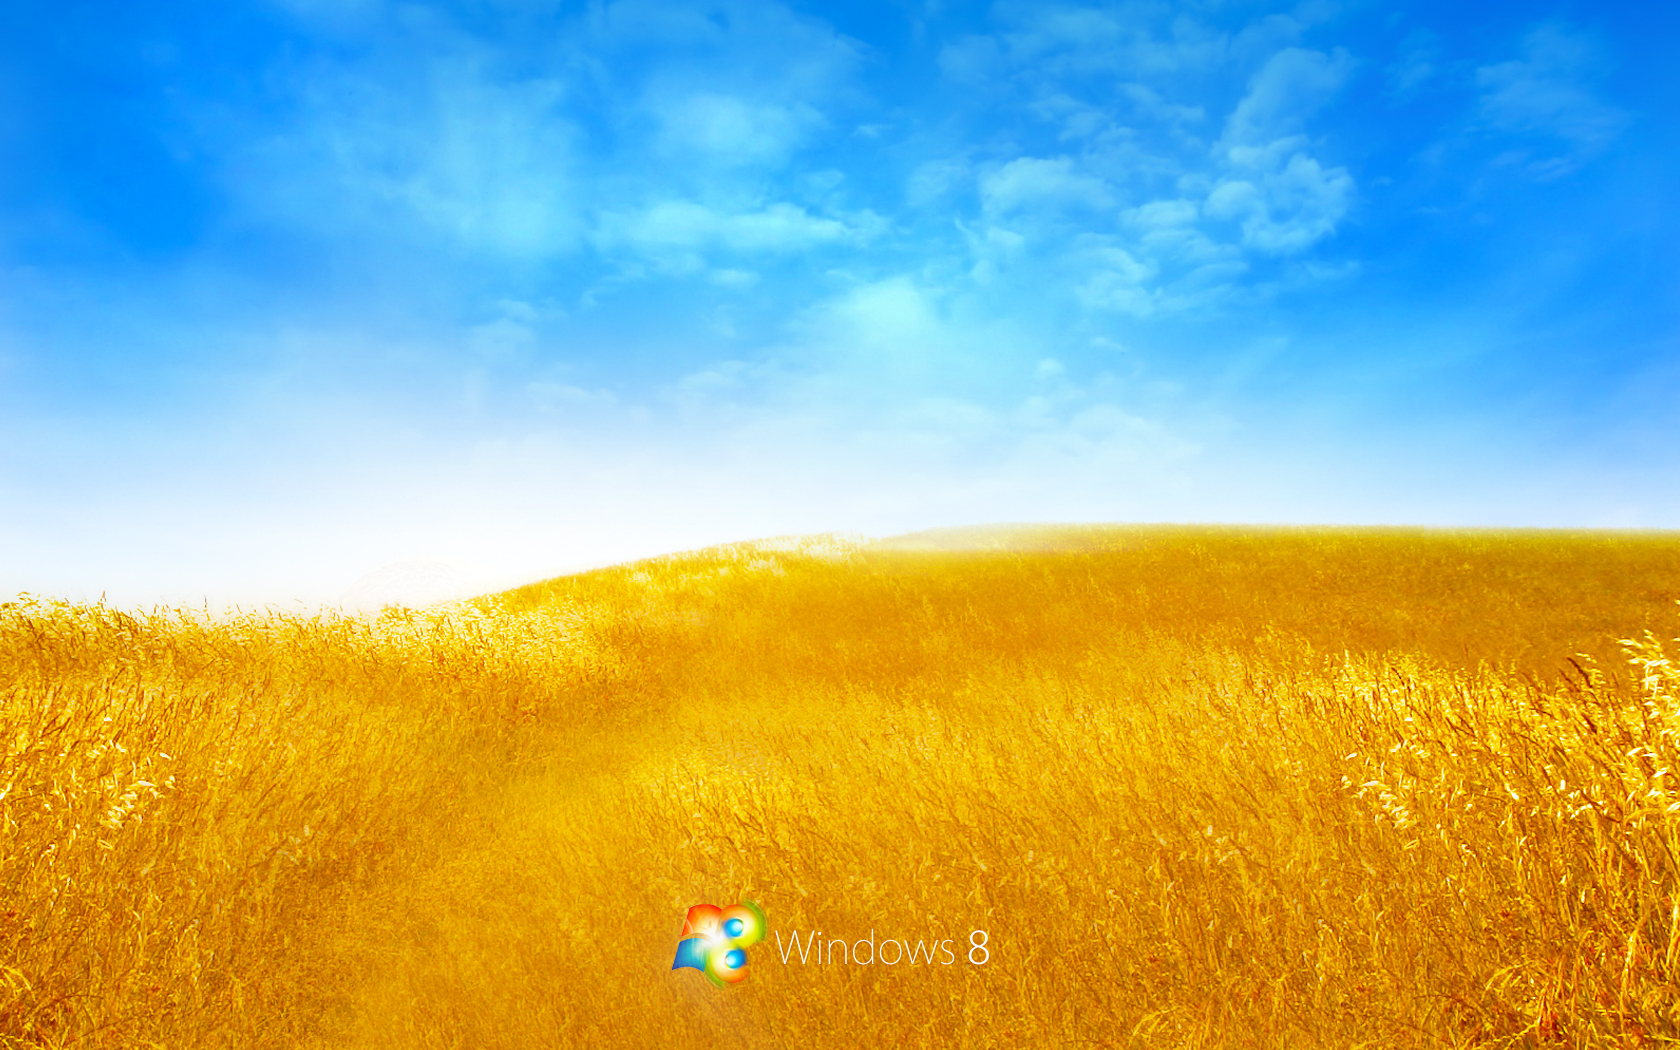  Beautiful Windows Wallpapers in High Quality